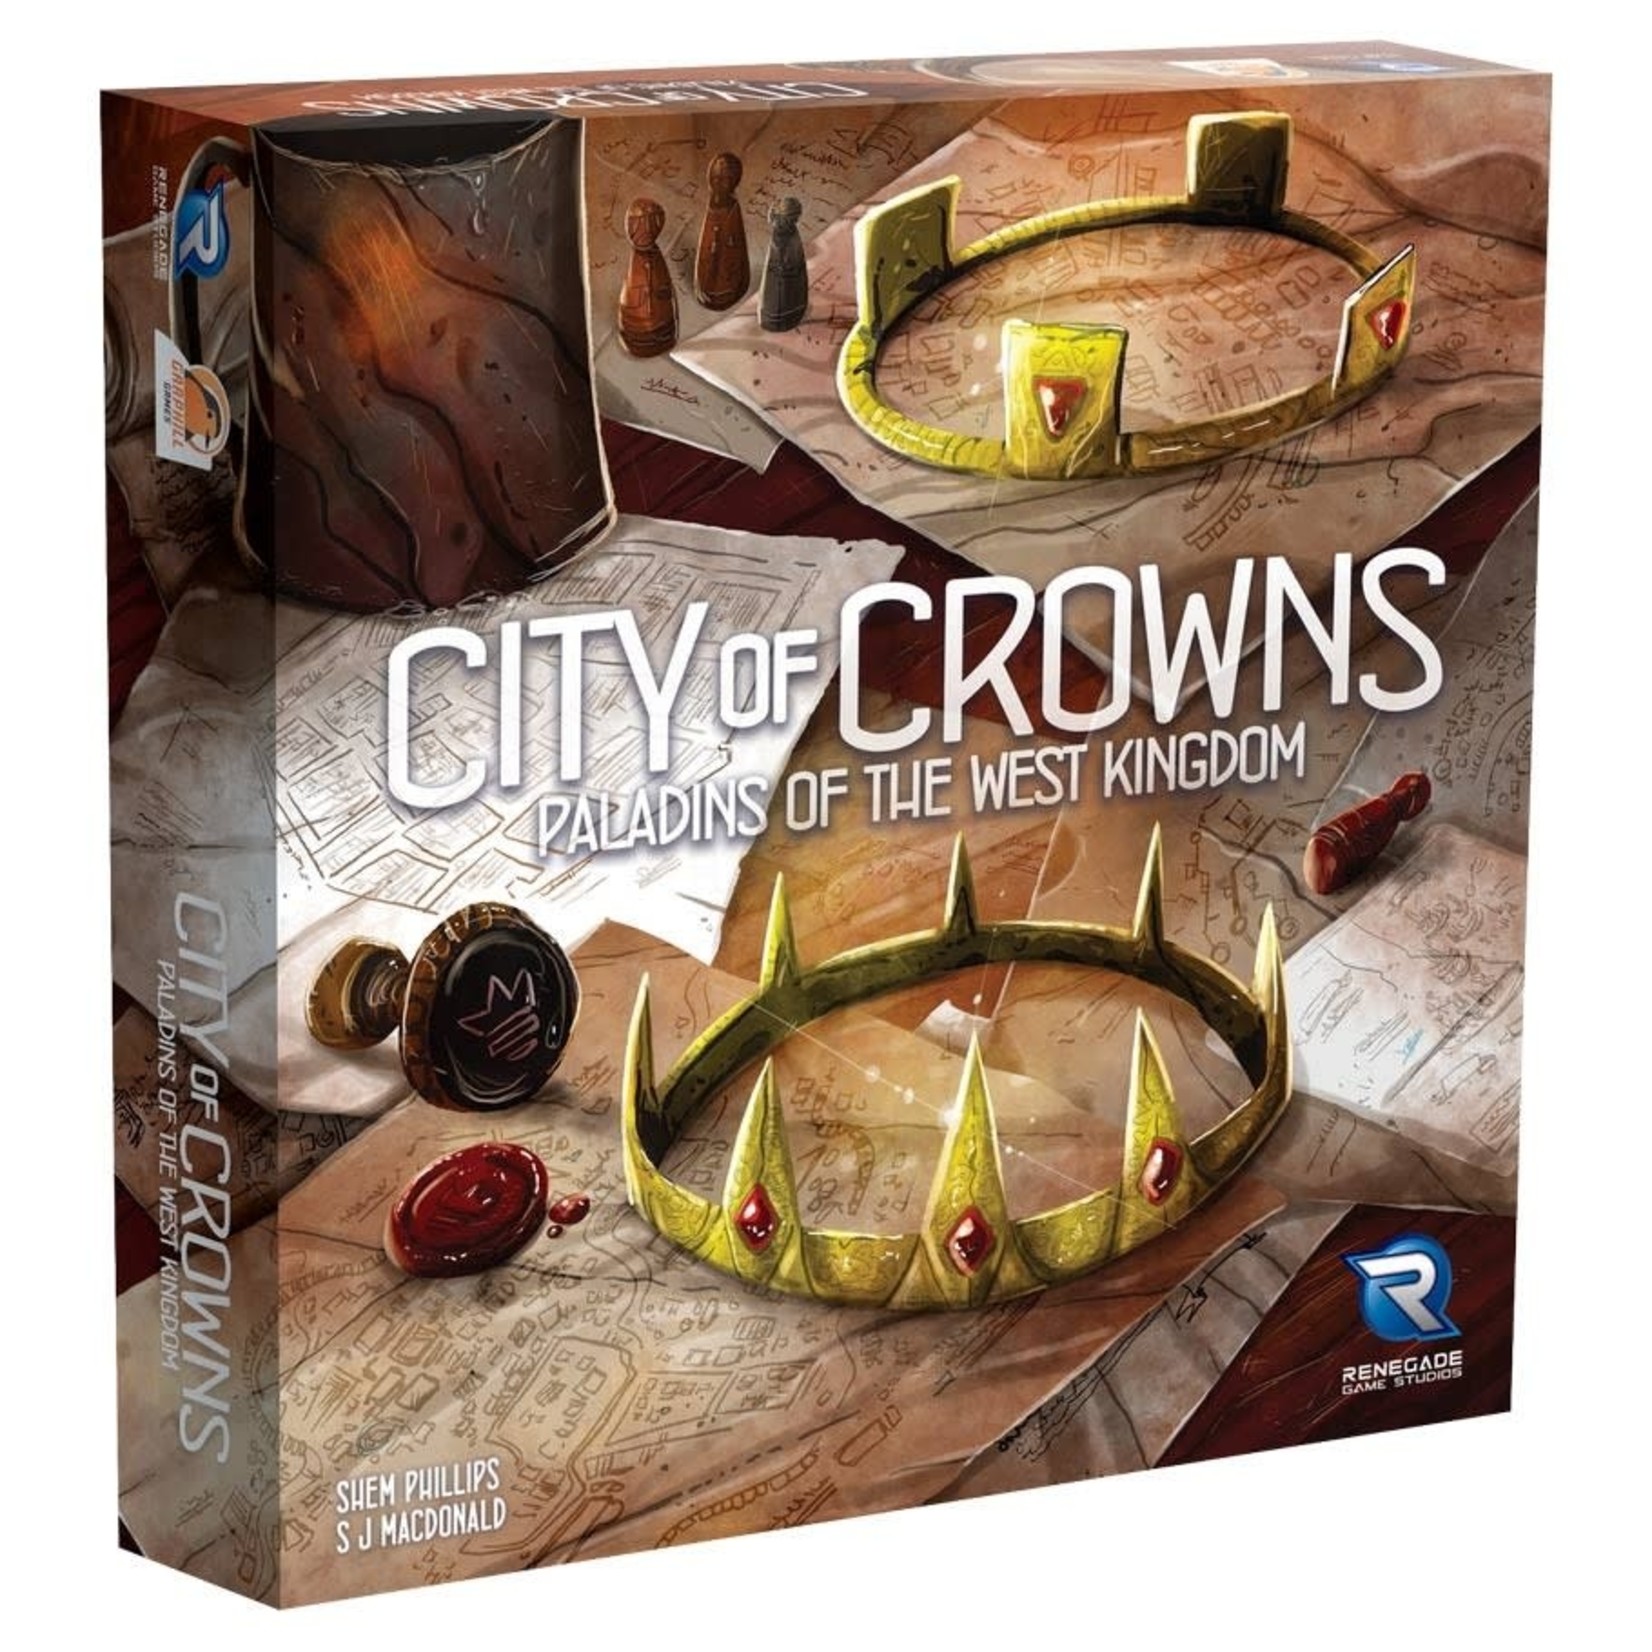 Renegade Paladins of the West Kingdom: City of Crowns Expansion